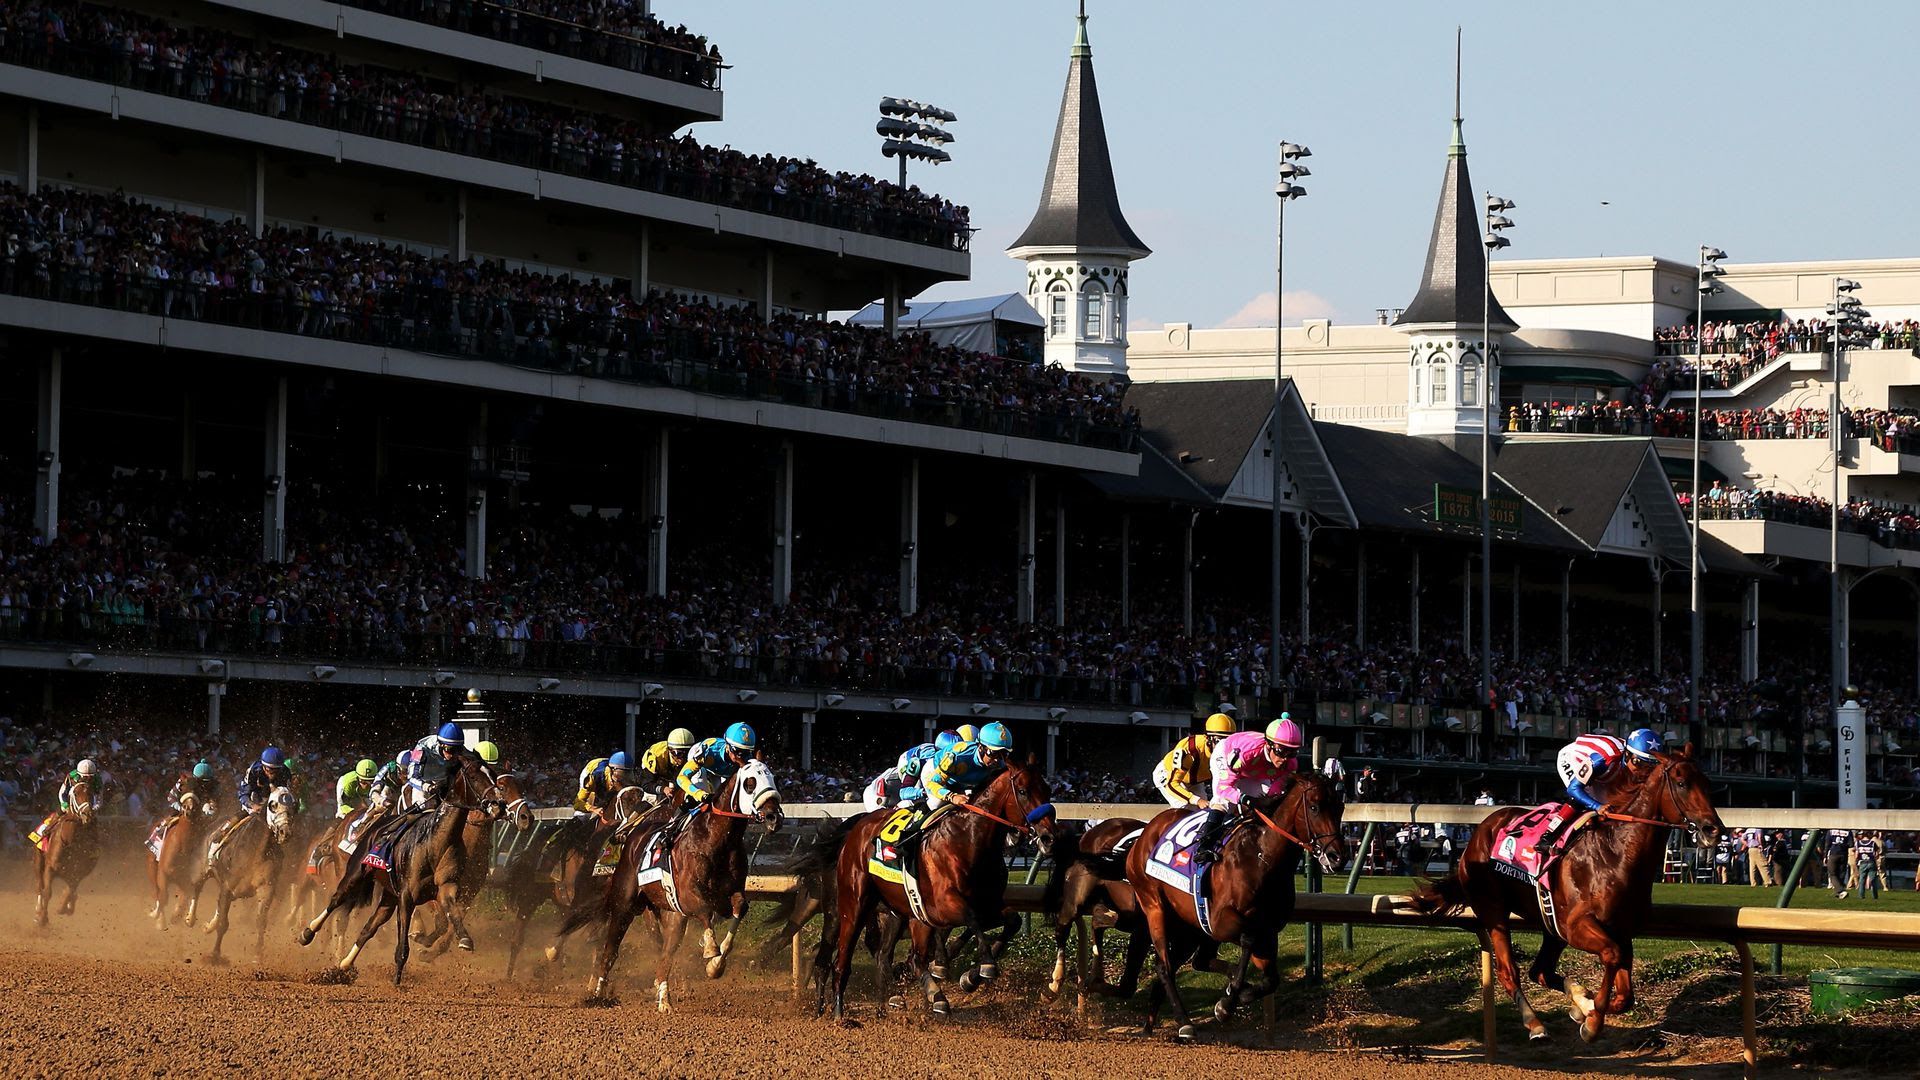 The 2015 Kentucky Derby. Photo: Chris Graythen/Getty Images